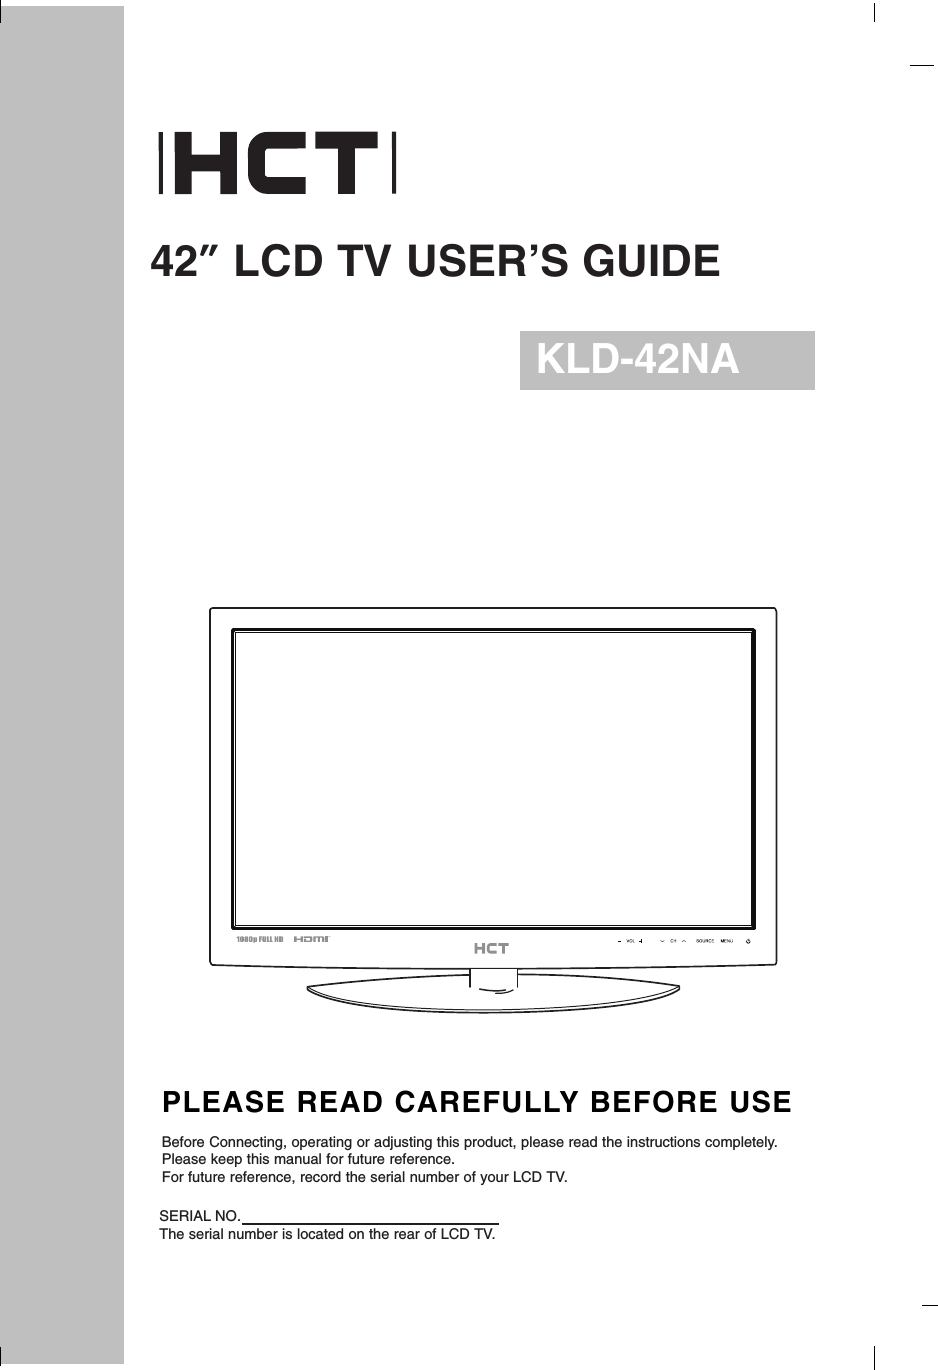 42”LCD TV USER’S GUIDEKLD-42NAPLEASE READ CAREFULLY BEFORE USEBefore Connecting, operating or adjusting this product, please read the instructions completely.Please keep this manual for future reference.For future reference, record the serial number of your LCD TV.SERIAL NO.The serial number is located on the rear of LCD TV.